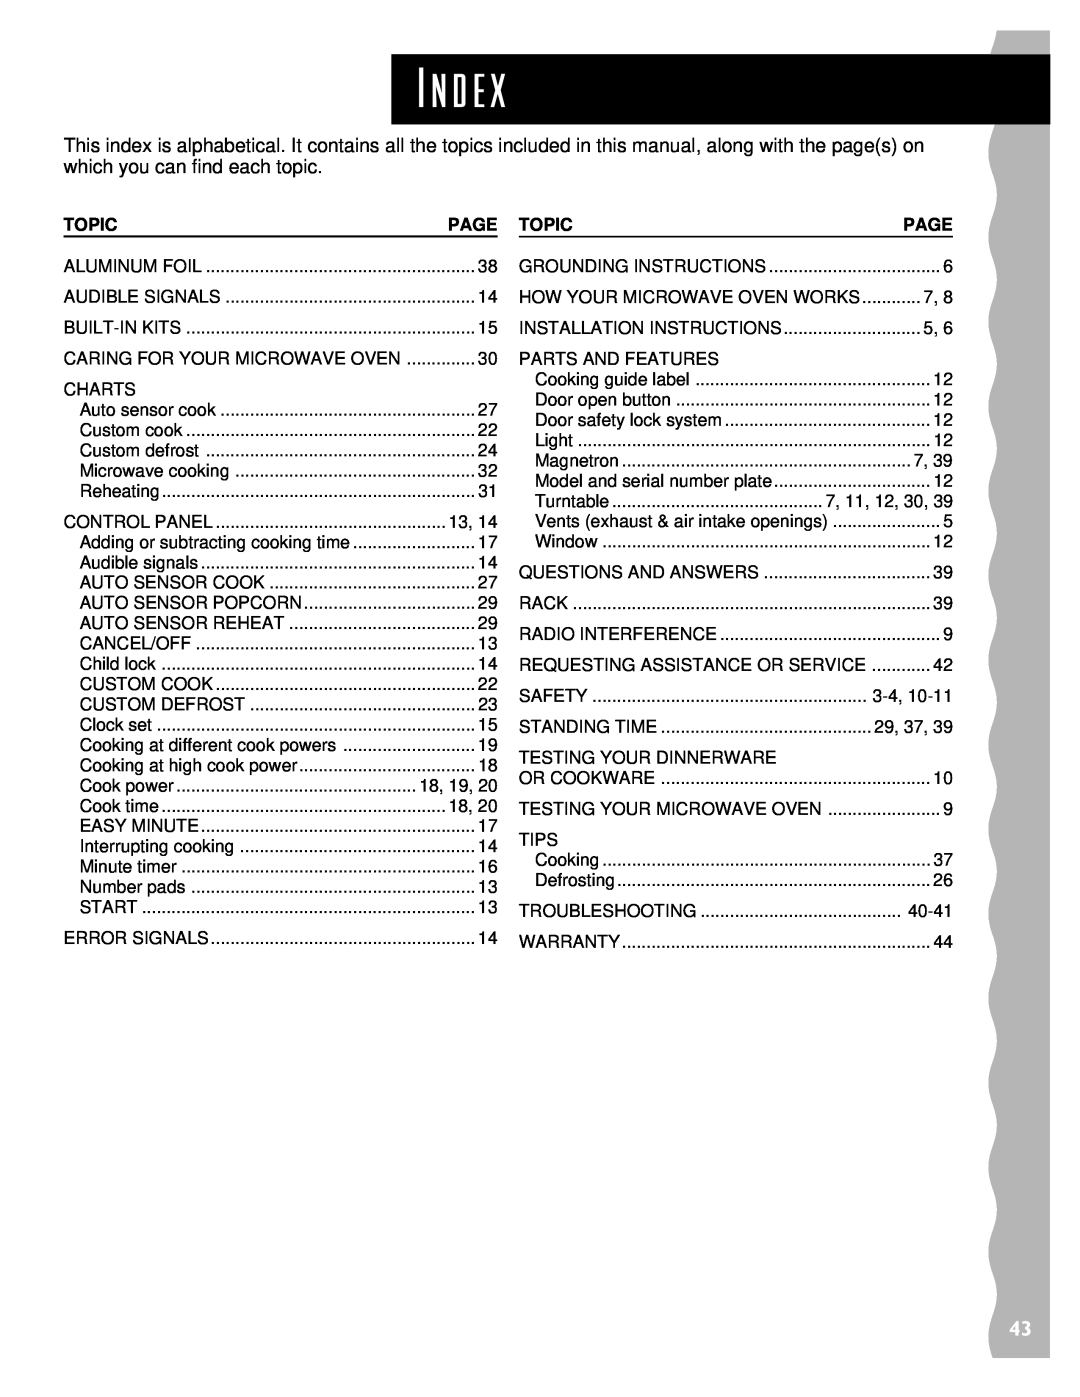 KitchenAid KCMS135H installation instructions I n d e, Page Topic 